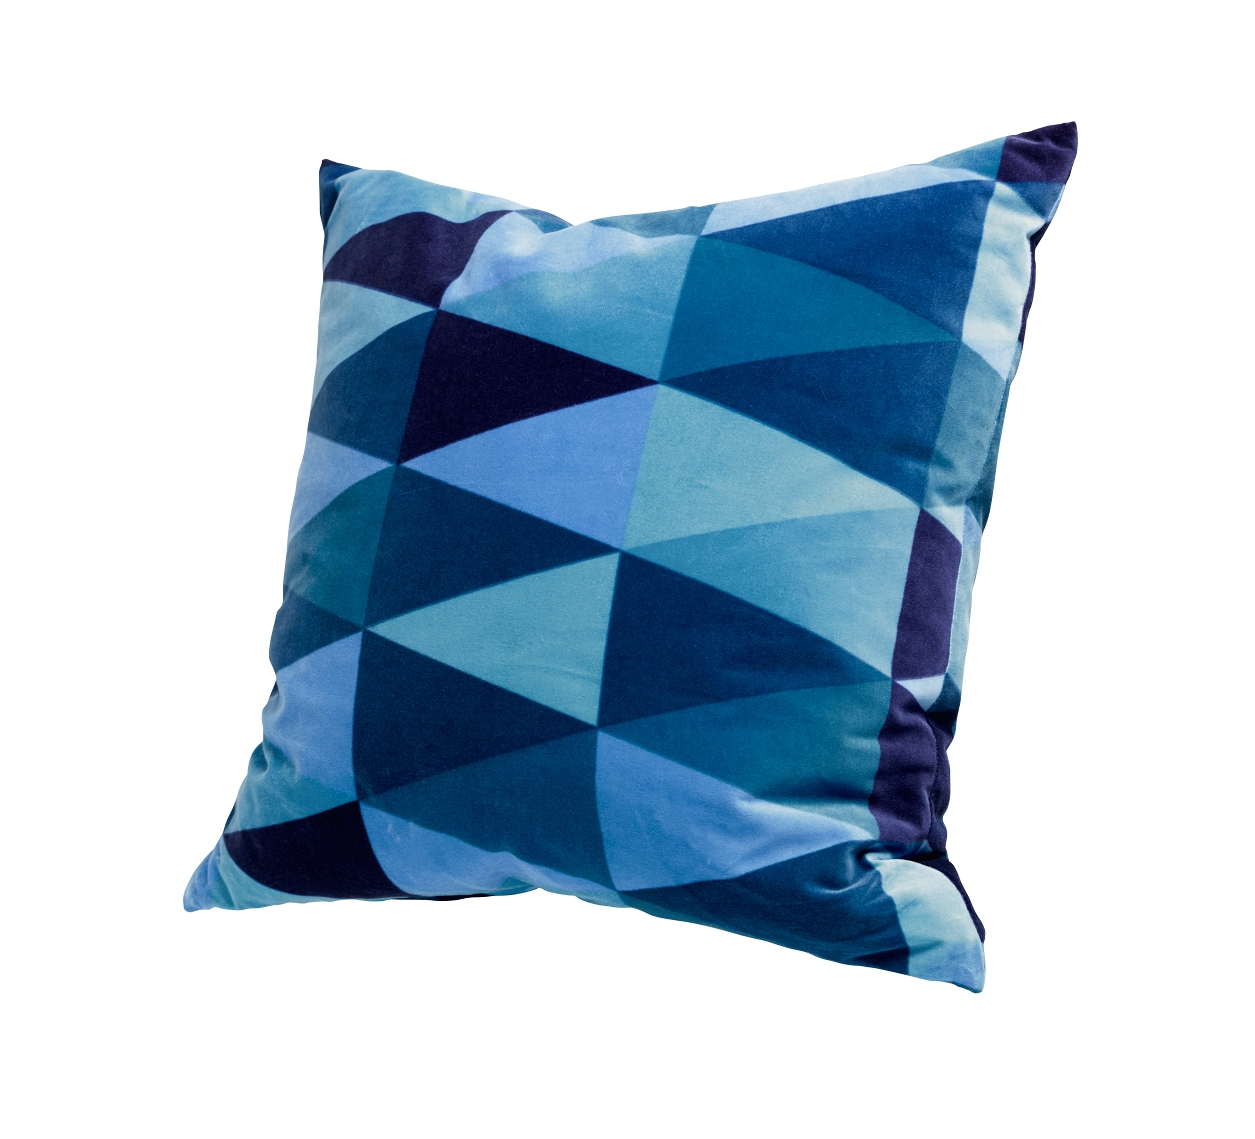 blue cushion cover with triangular design on a white background